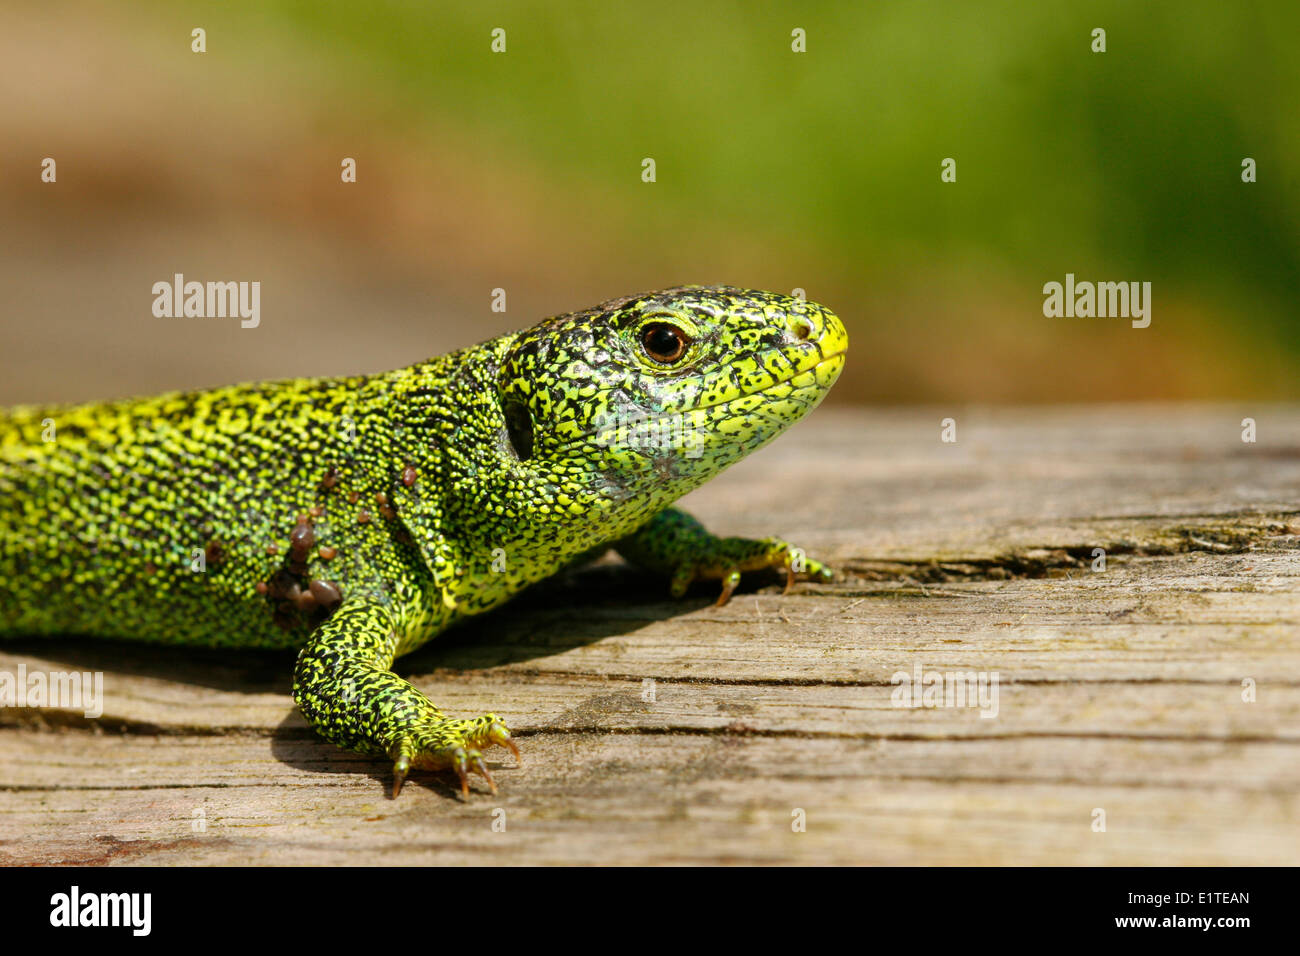 Close-up of a male sand lizard Stock Photo